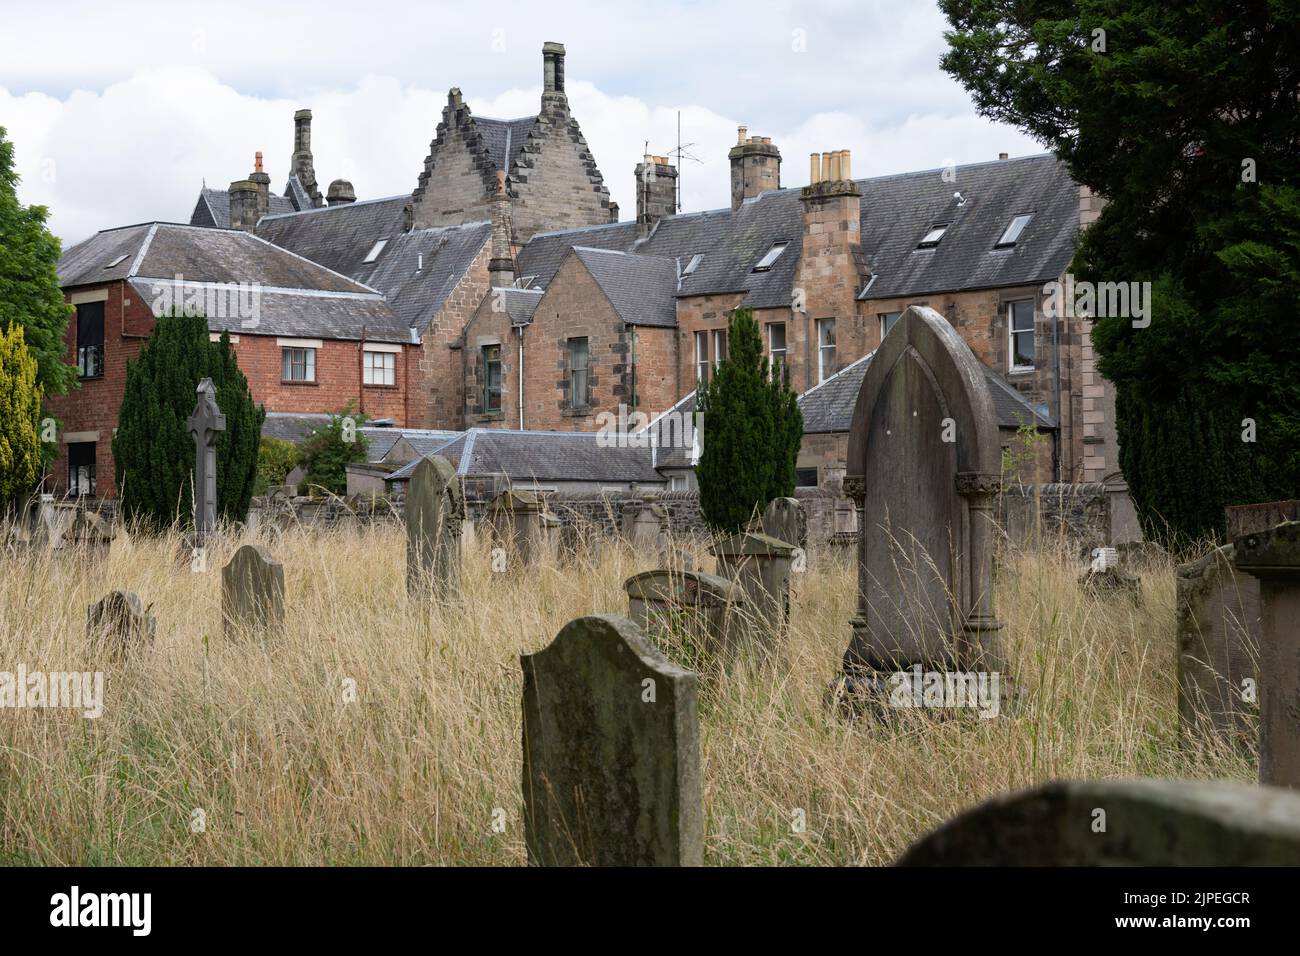 Greyfriars burial ground, an historic cemetery with grass left long to encourage wildlife - Perth, Scotland, UK Stock Photo